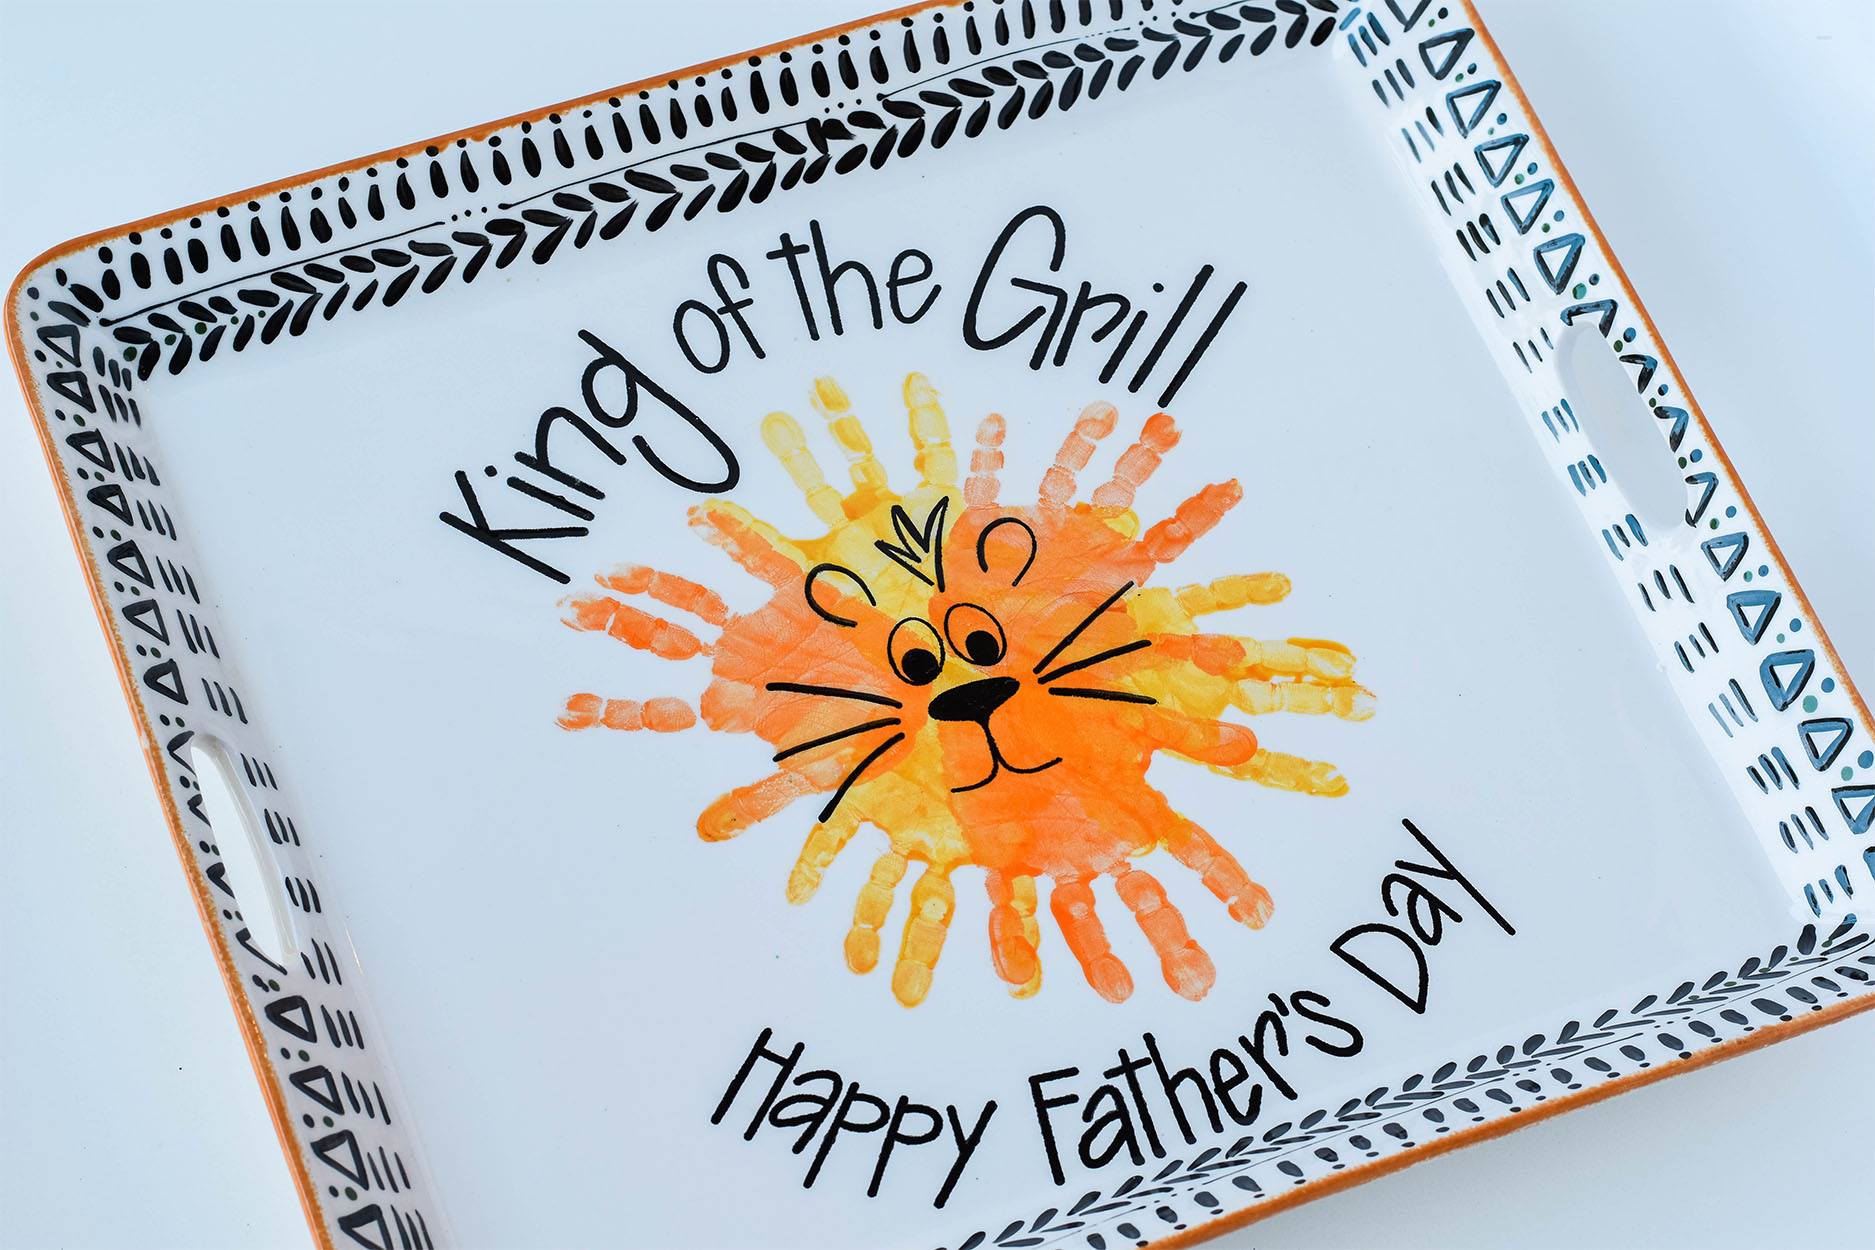 A father 's day card with handprints of a lion.